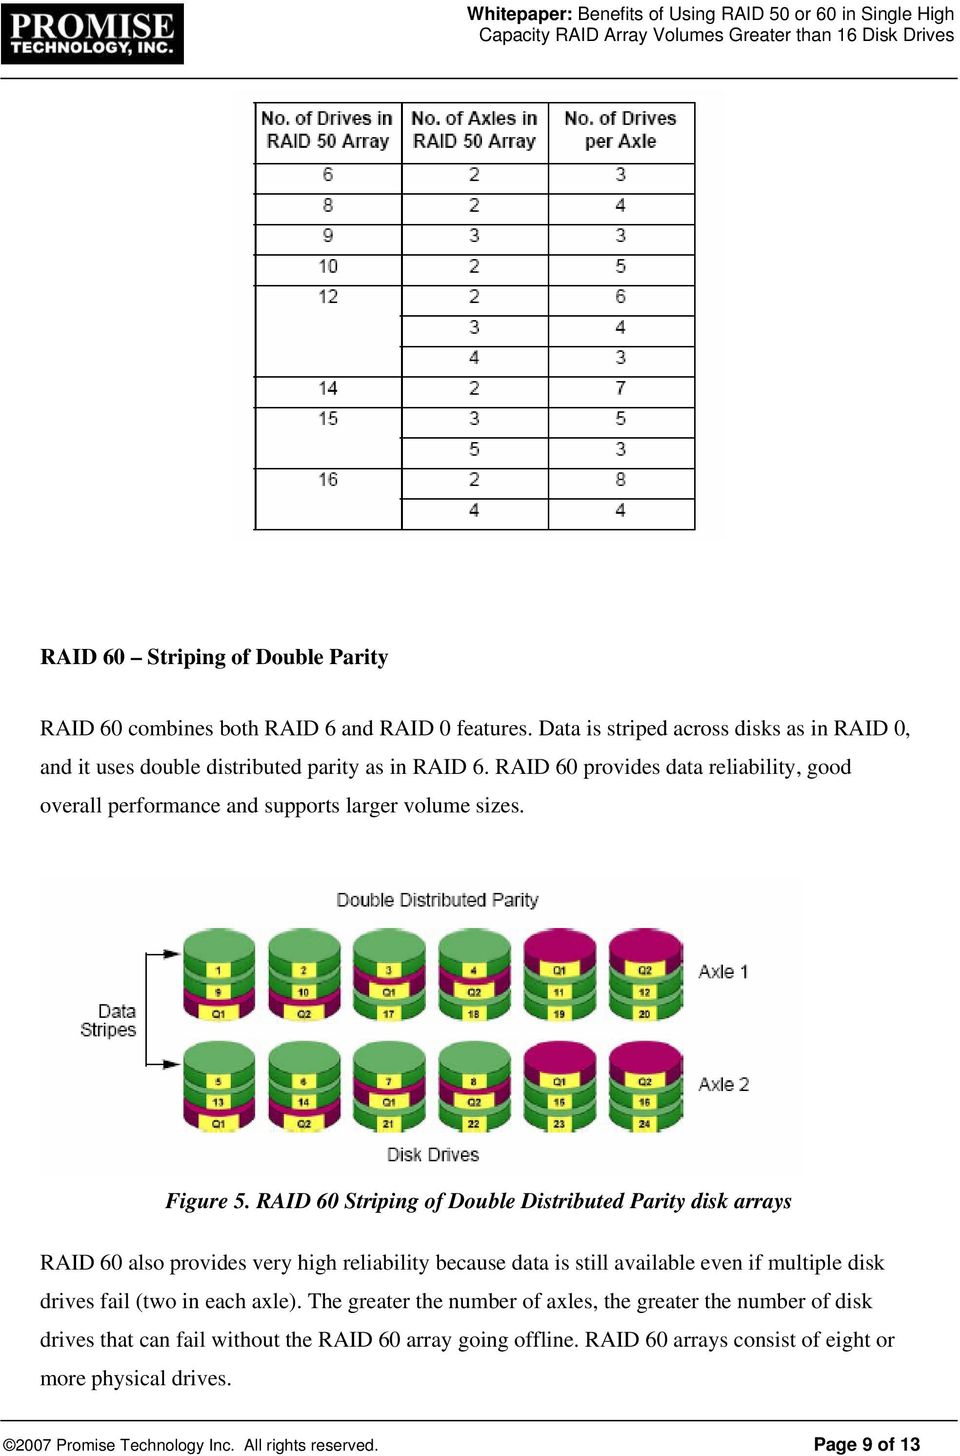 RAID 60 Striping of Double Distributed Parity disk arrays RAID 60 also provides very high reliability because data is still available even if multiple disk drives fail (two in